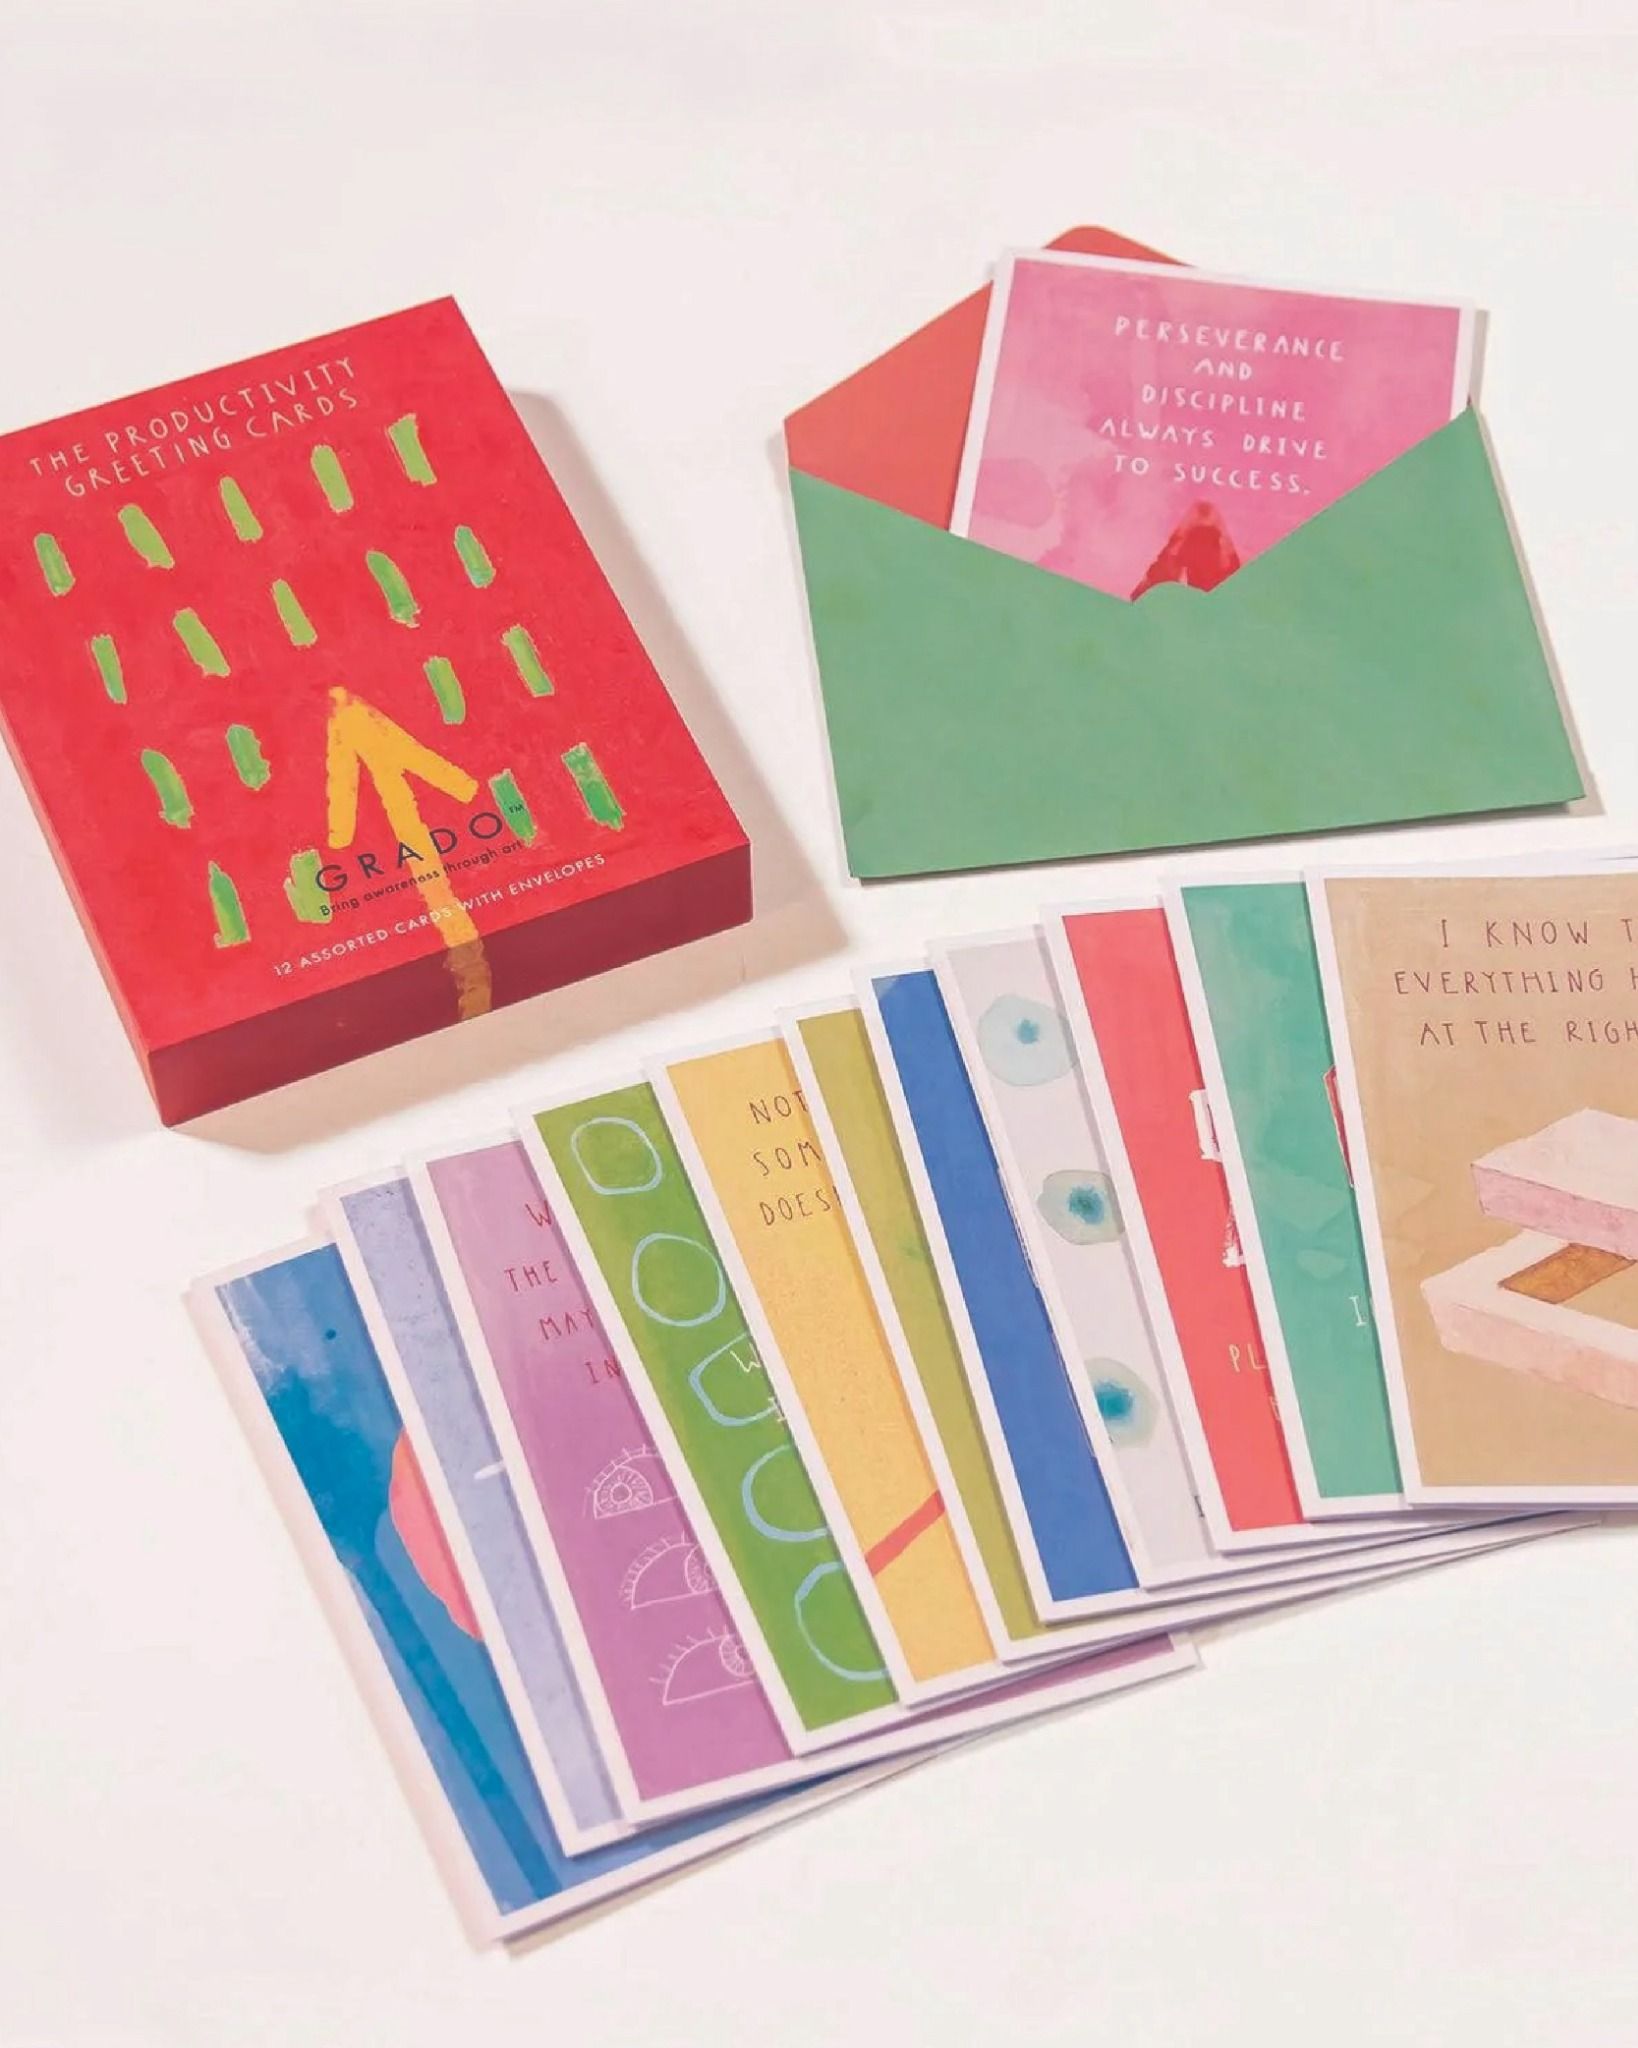  Productivity Greeting Cards 